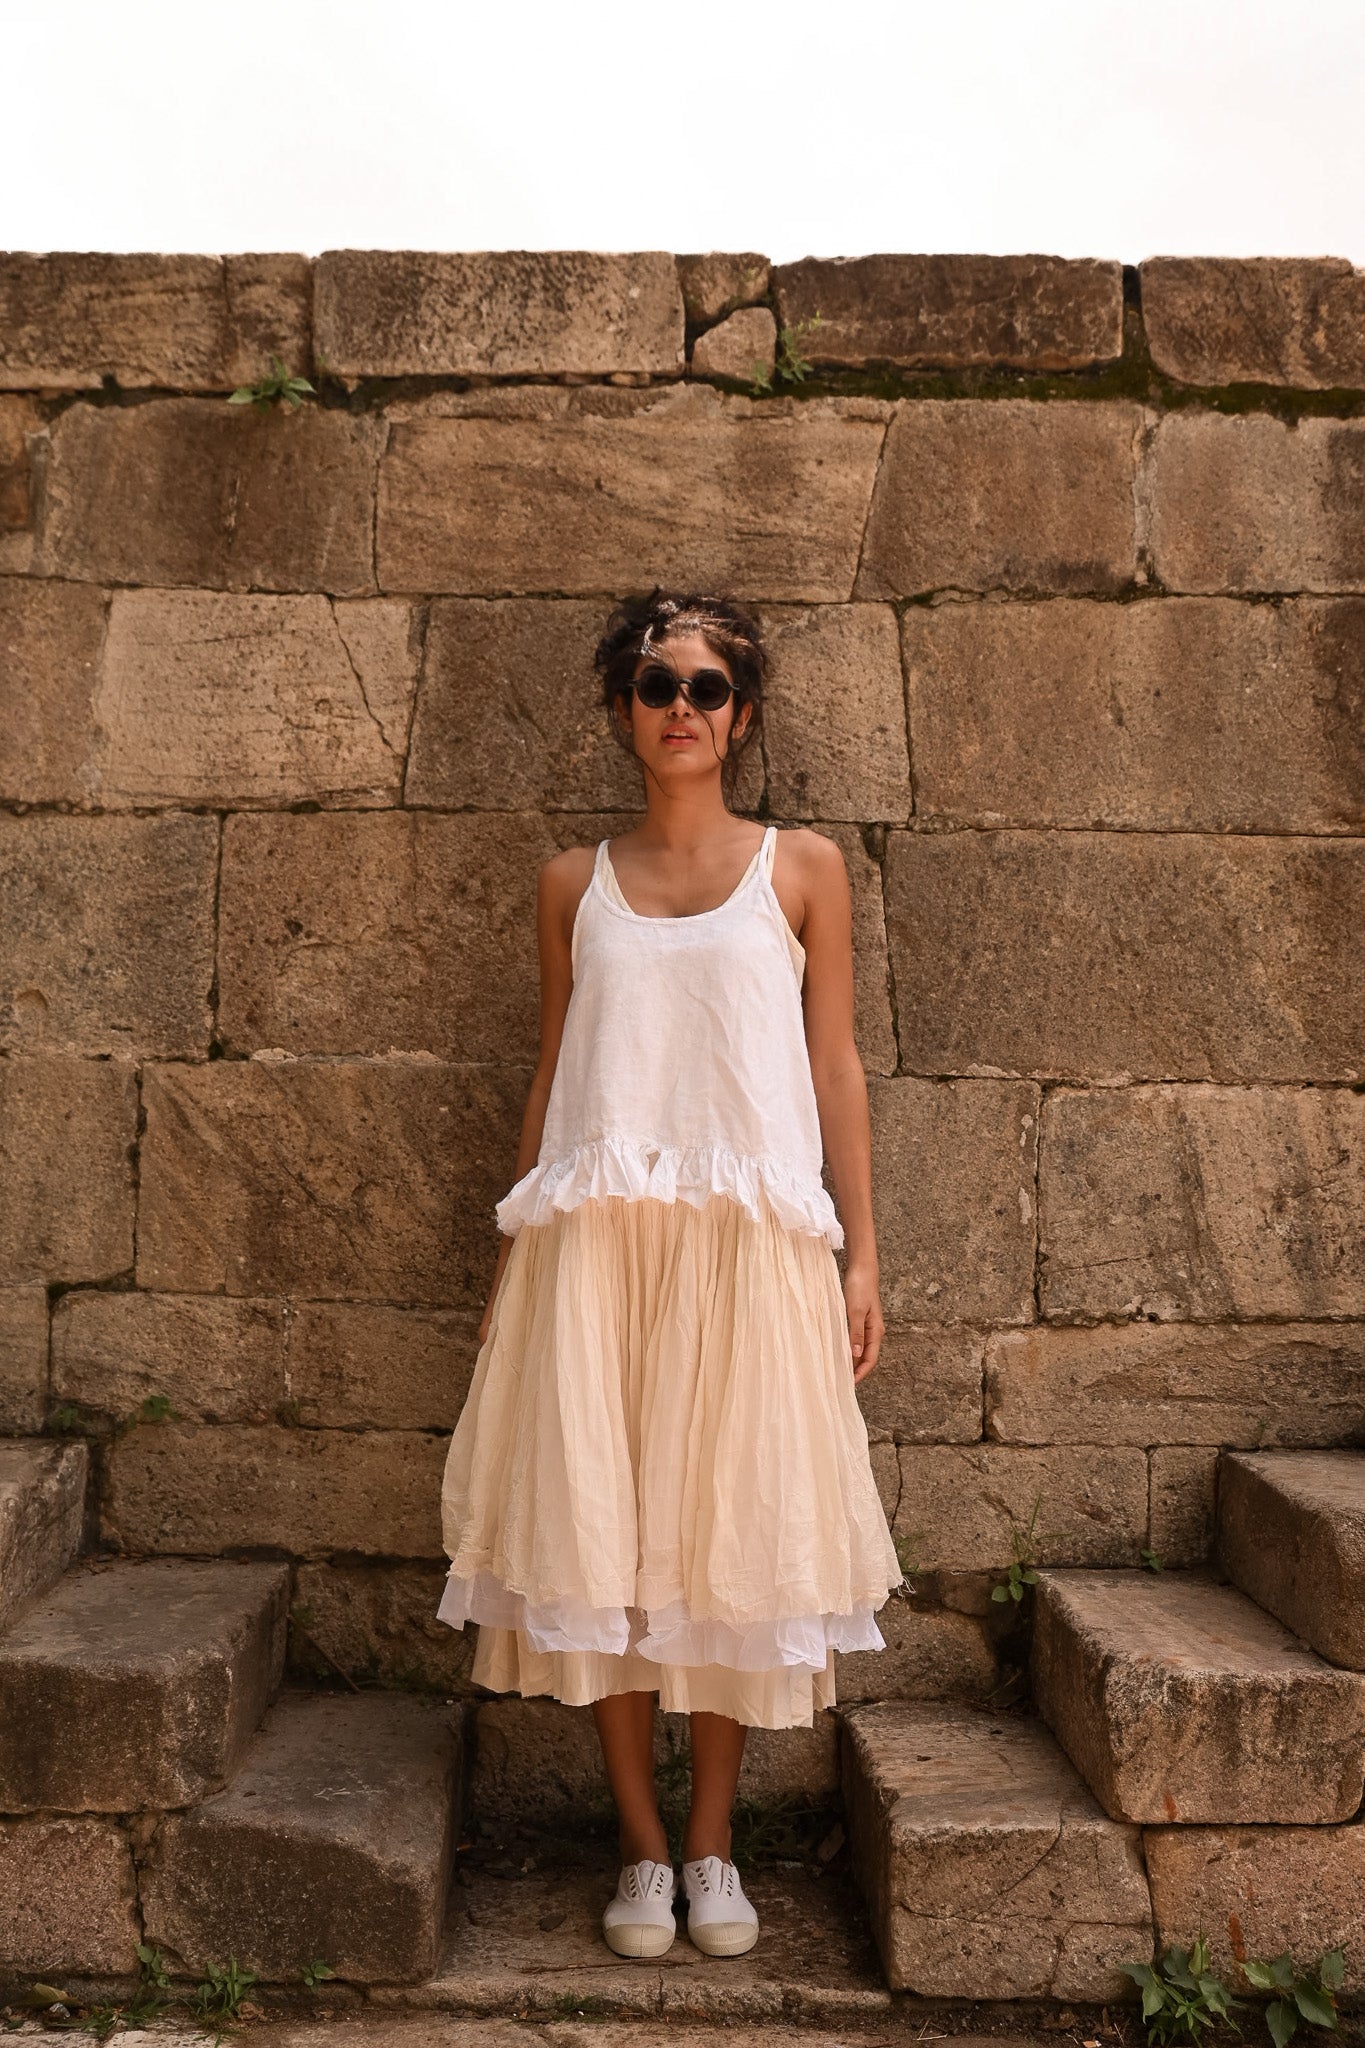 A MegbyDesign model is wearing a white elisa cami made from a lightweight cotton material and the straps are adjustable. It is a full body photo and the model is standing in from of a block stone wall.